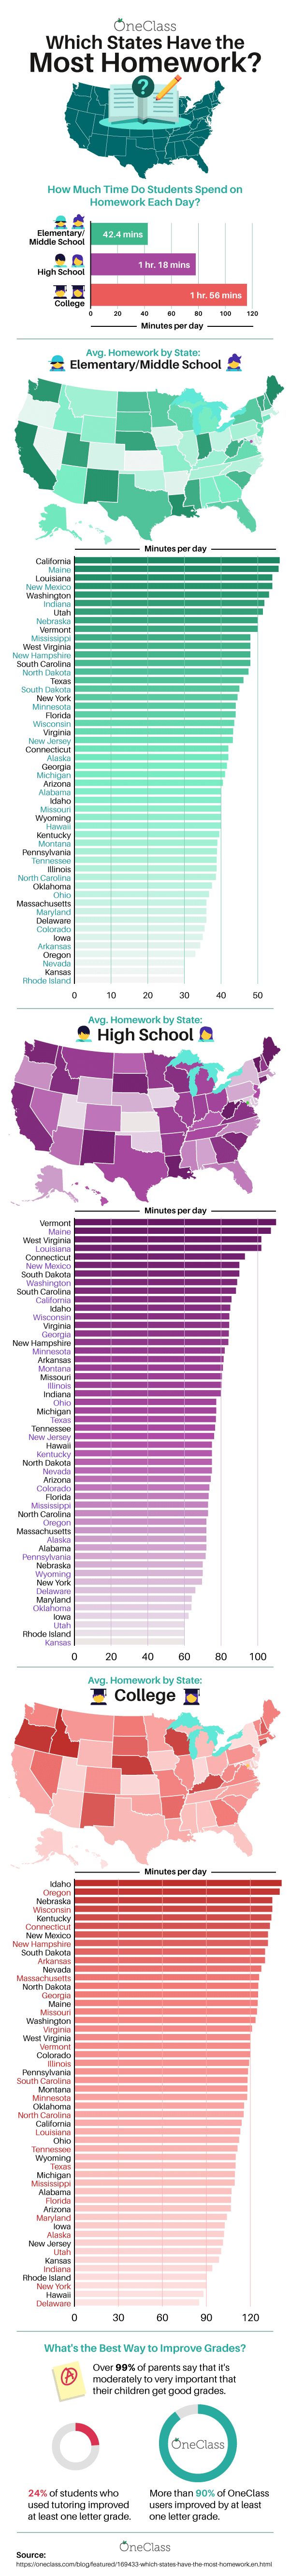 which states have the most homework